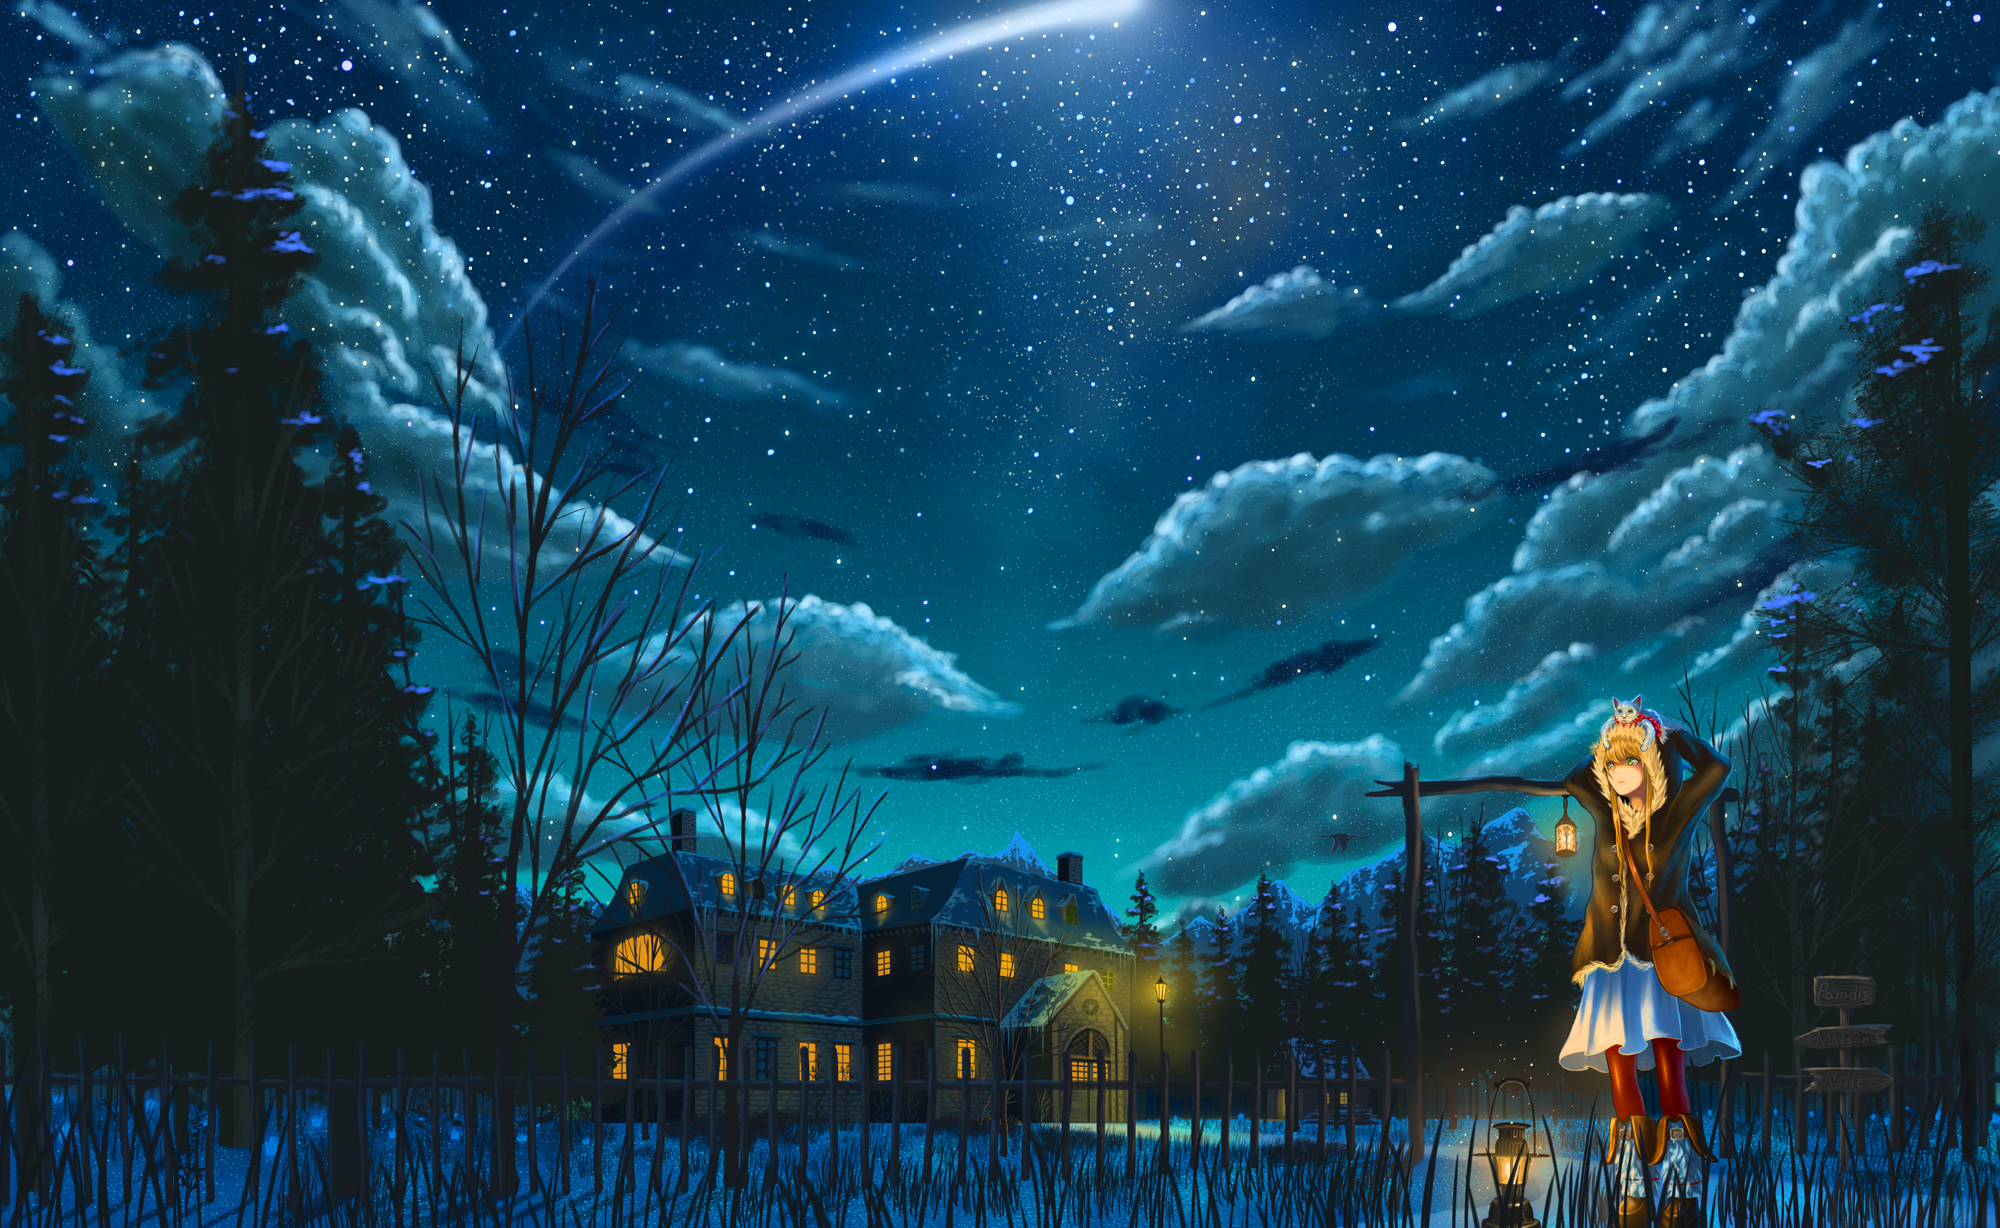 Download 21 night-anime-background Free--Anime-Forest-At-Night-Background-Night-forest-.png